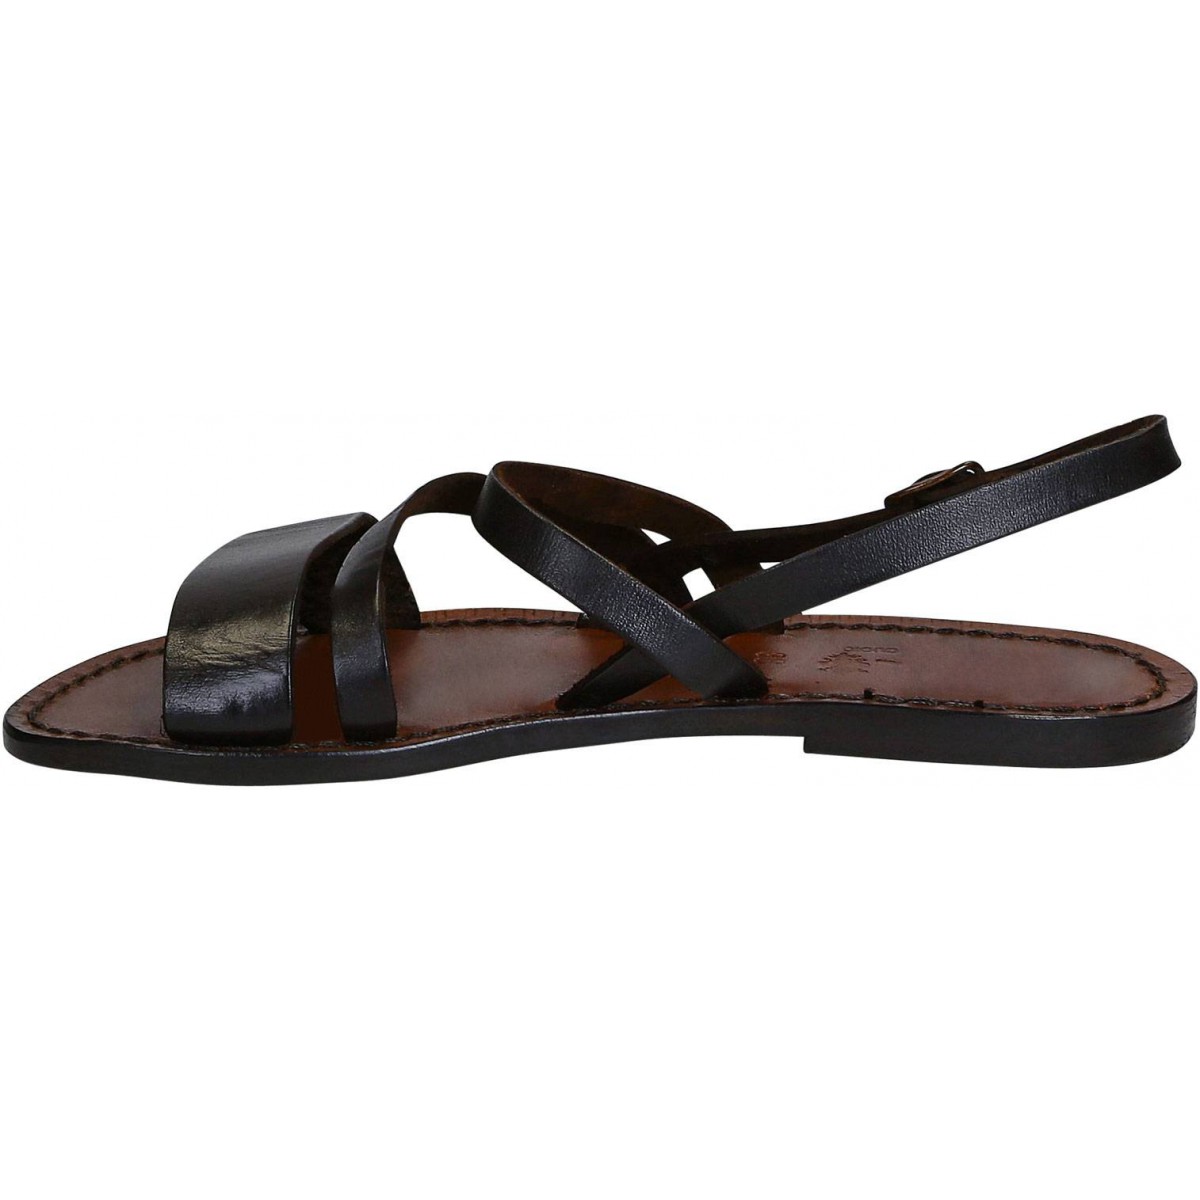 Women's brown leather flat sandals handmade | The leather craftsmen